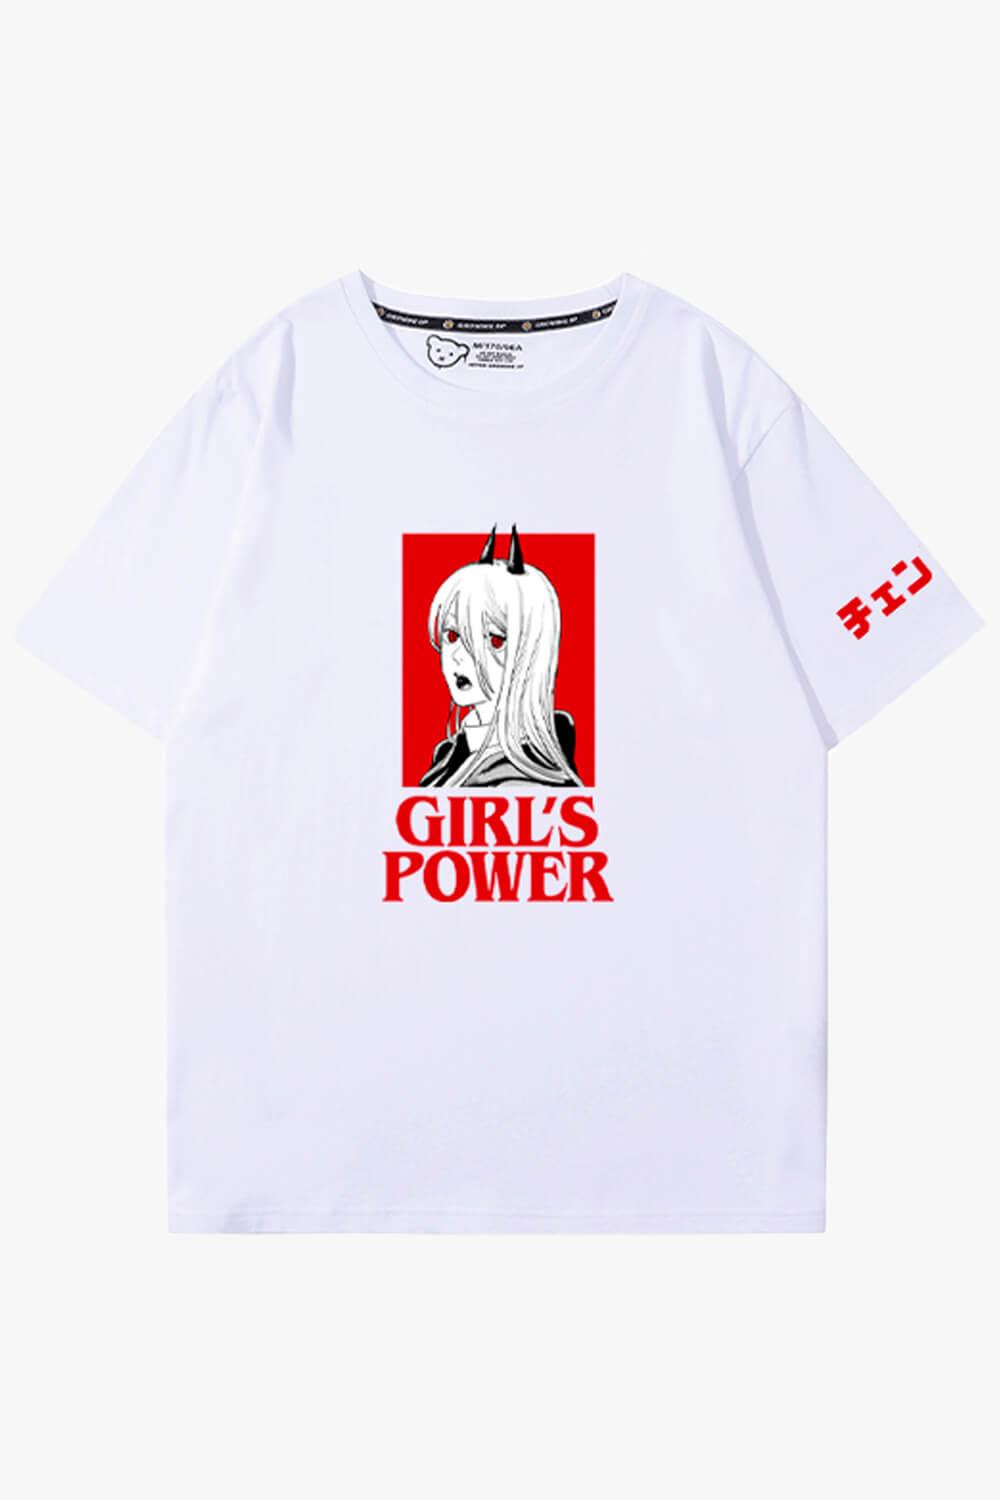 Chainsaw Man Girls Power Animecore T-Shirt - Aesthetic Clothes Shop